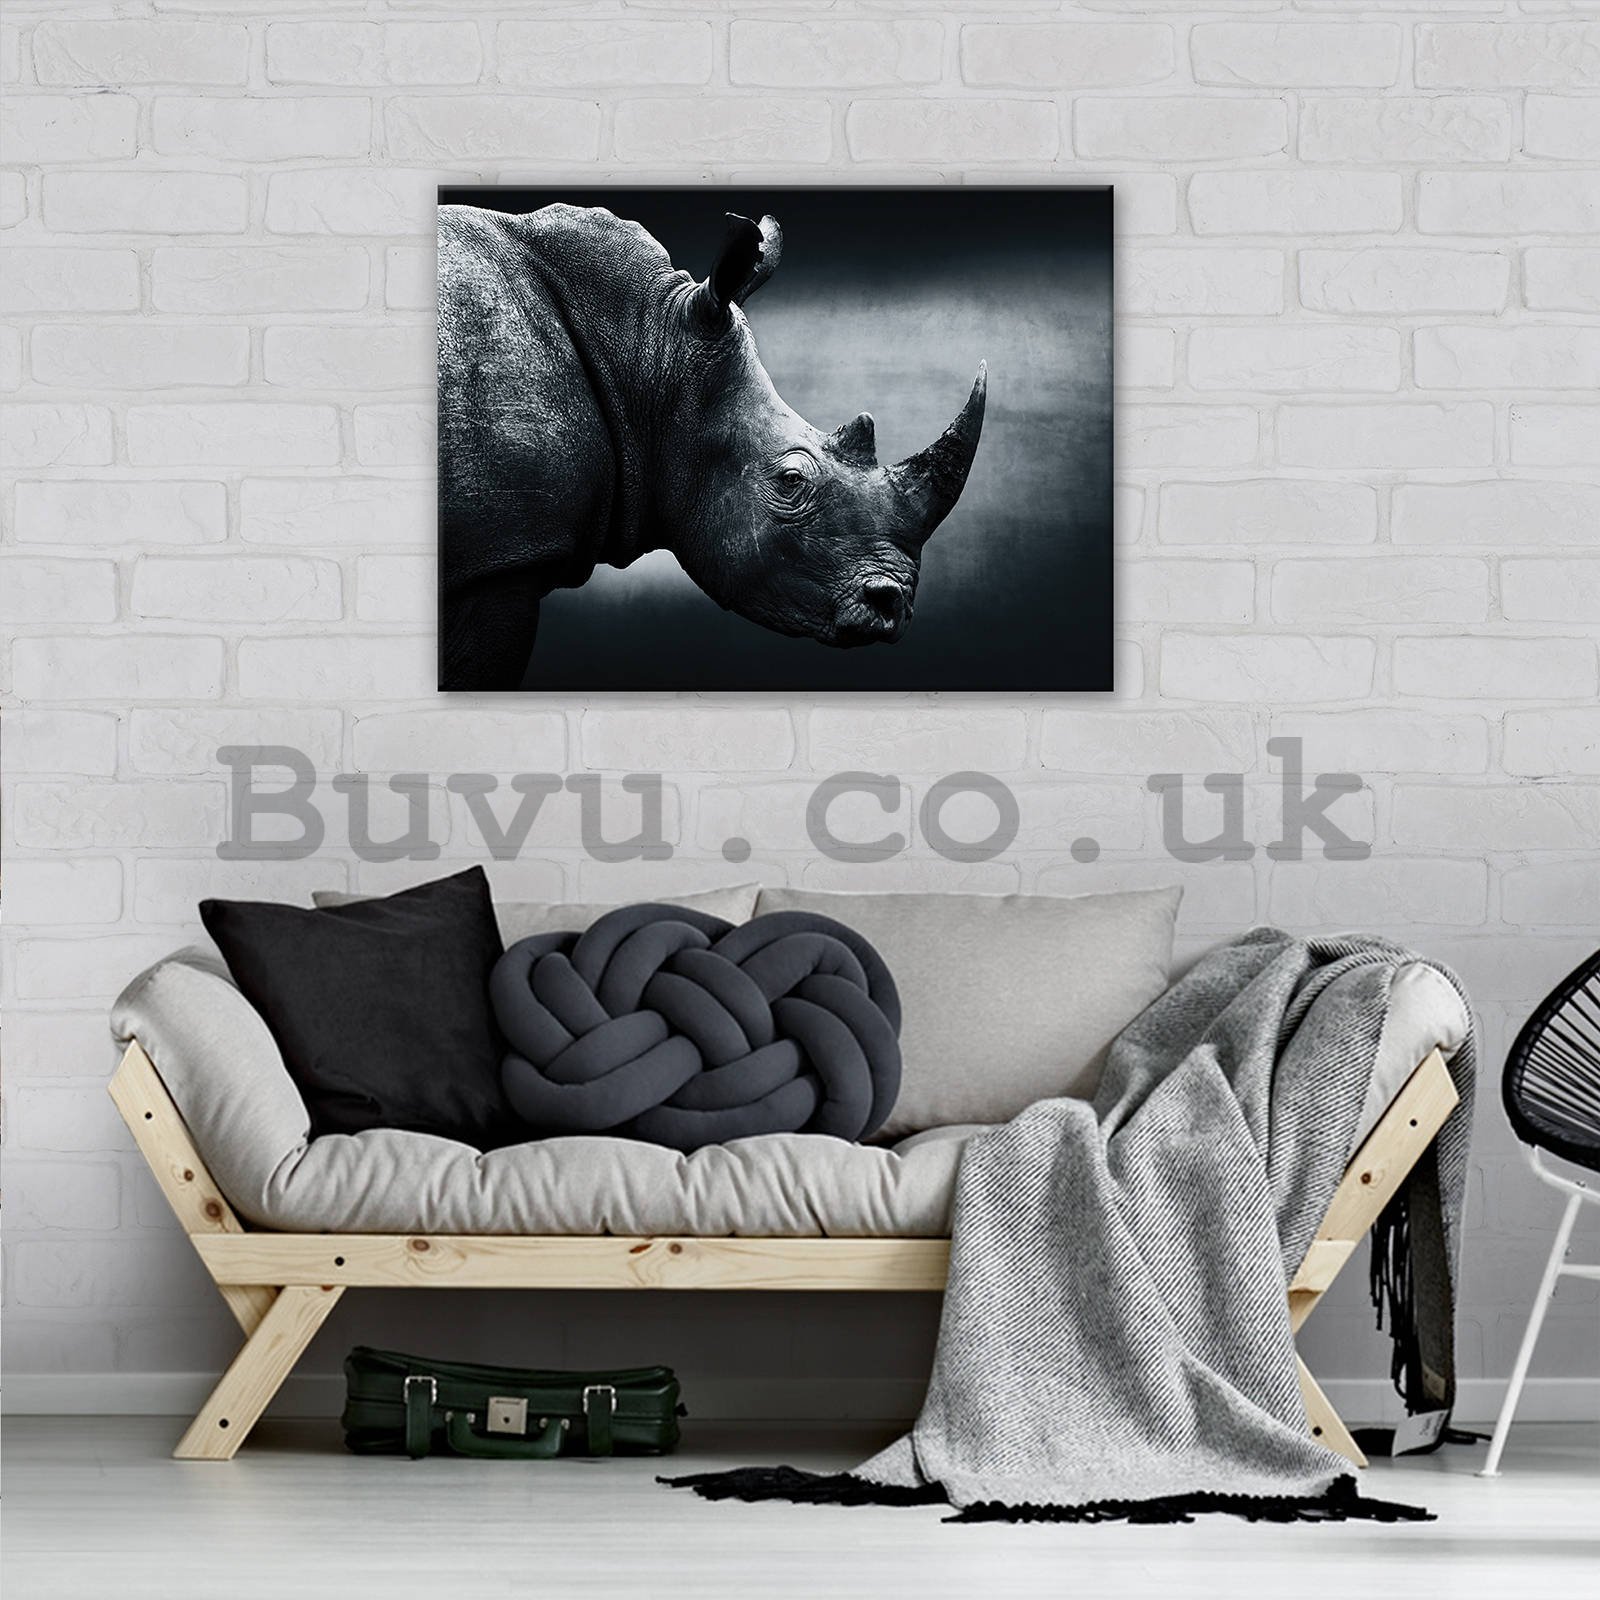 Painting on canvas: Rhino (black and white) - 80x60 cm